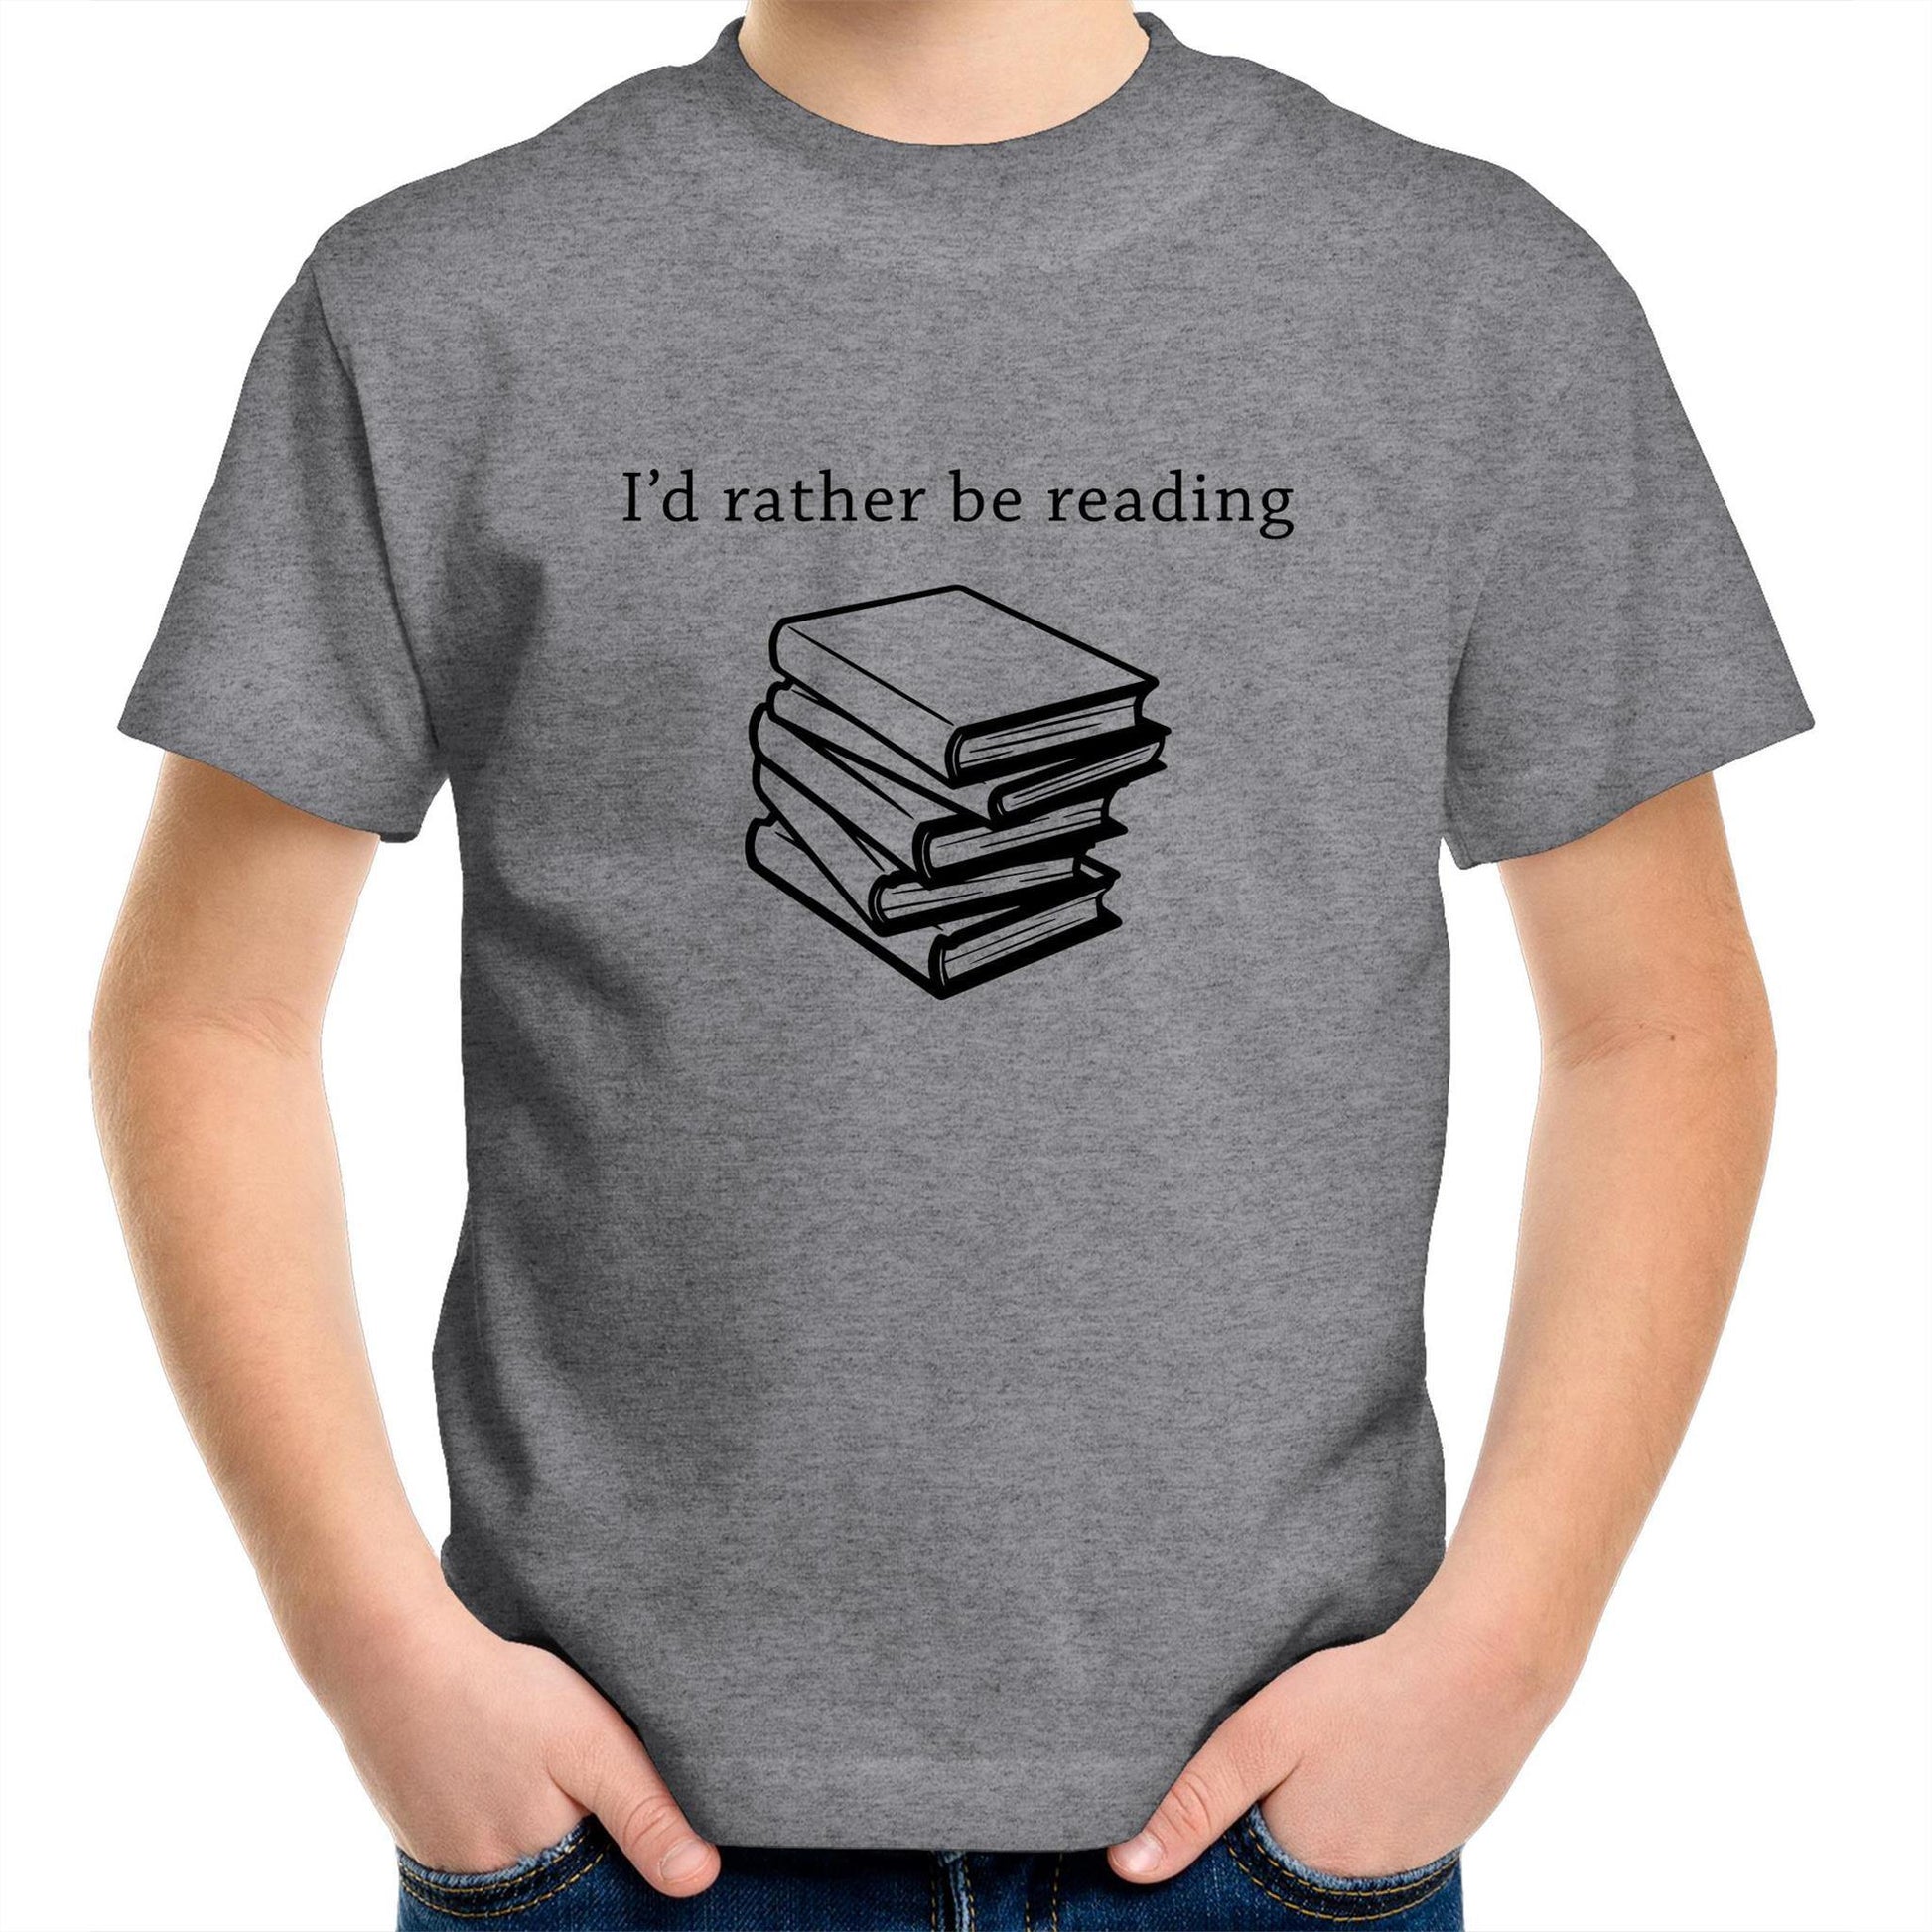 I'd Rather Be Reading - Kids Youth Crew T-Shirt Grey Marle Kids Youth T-shirt Funny